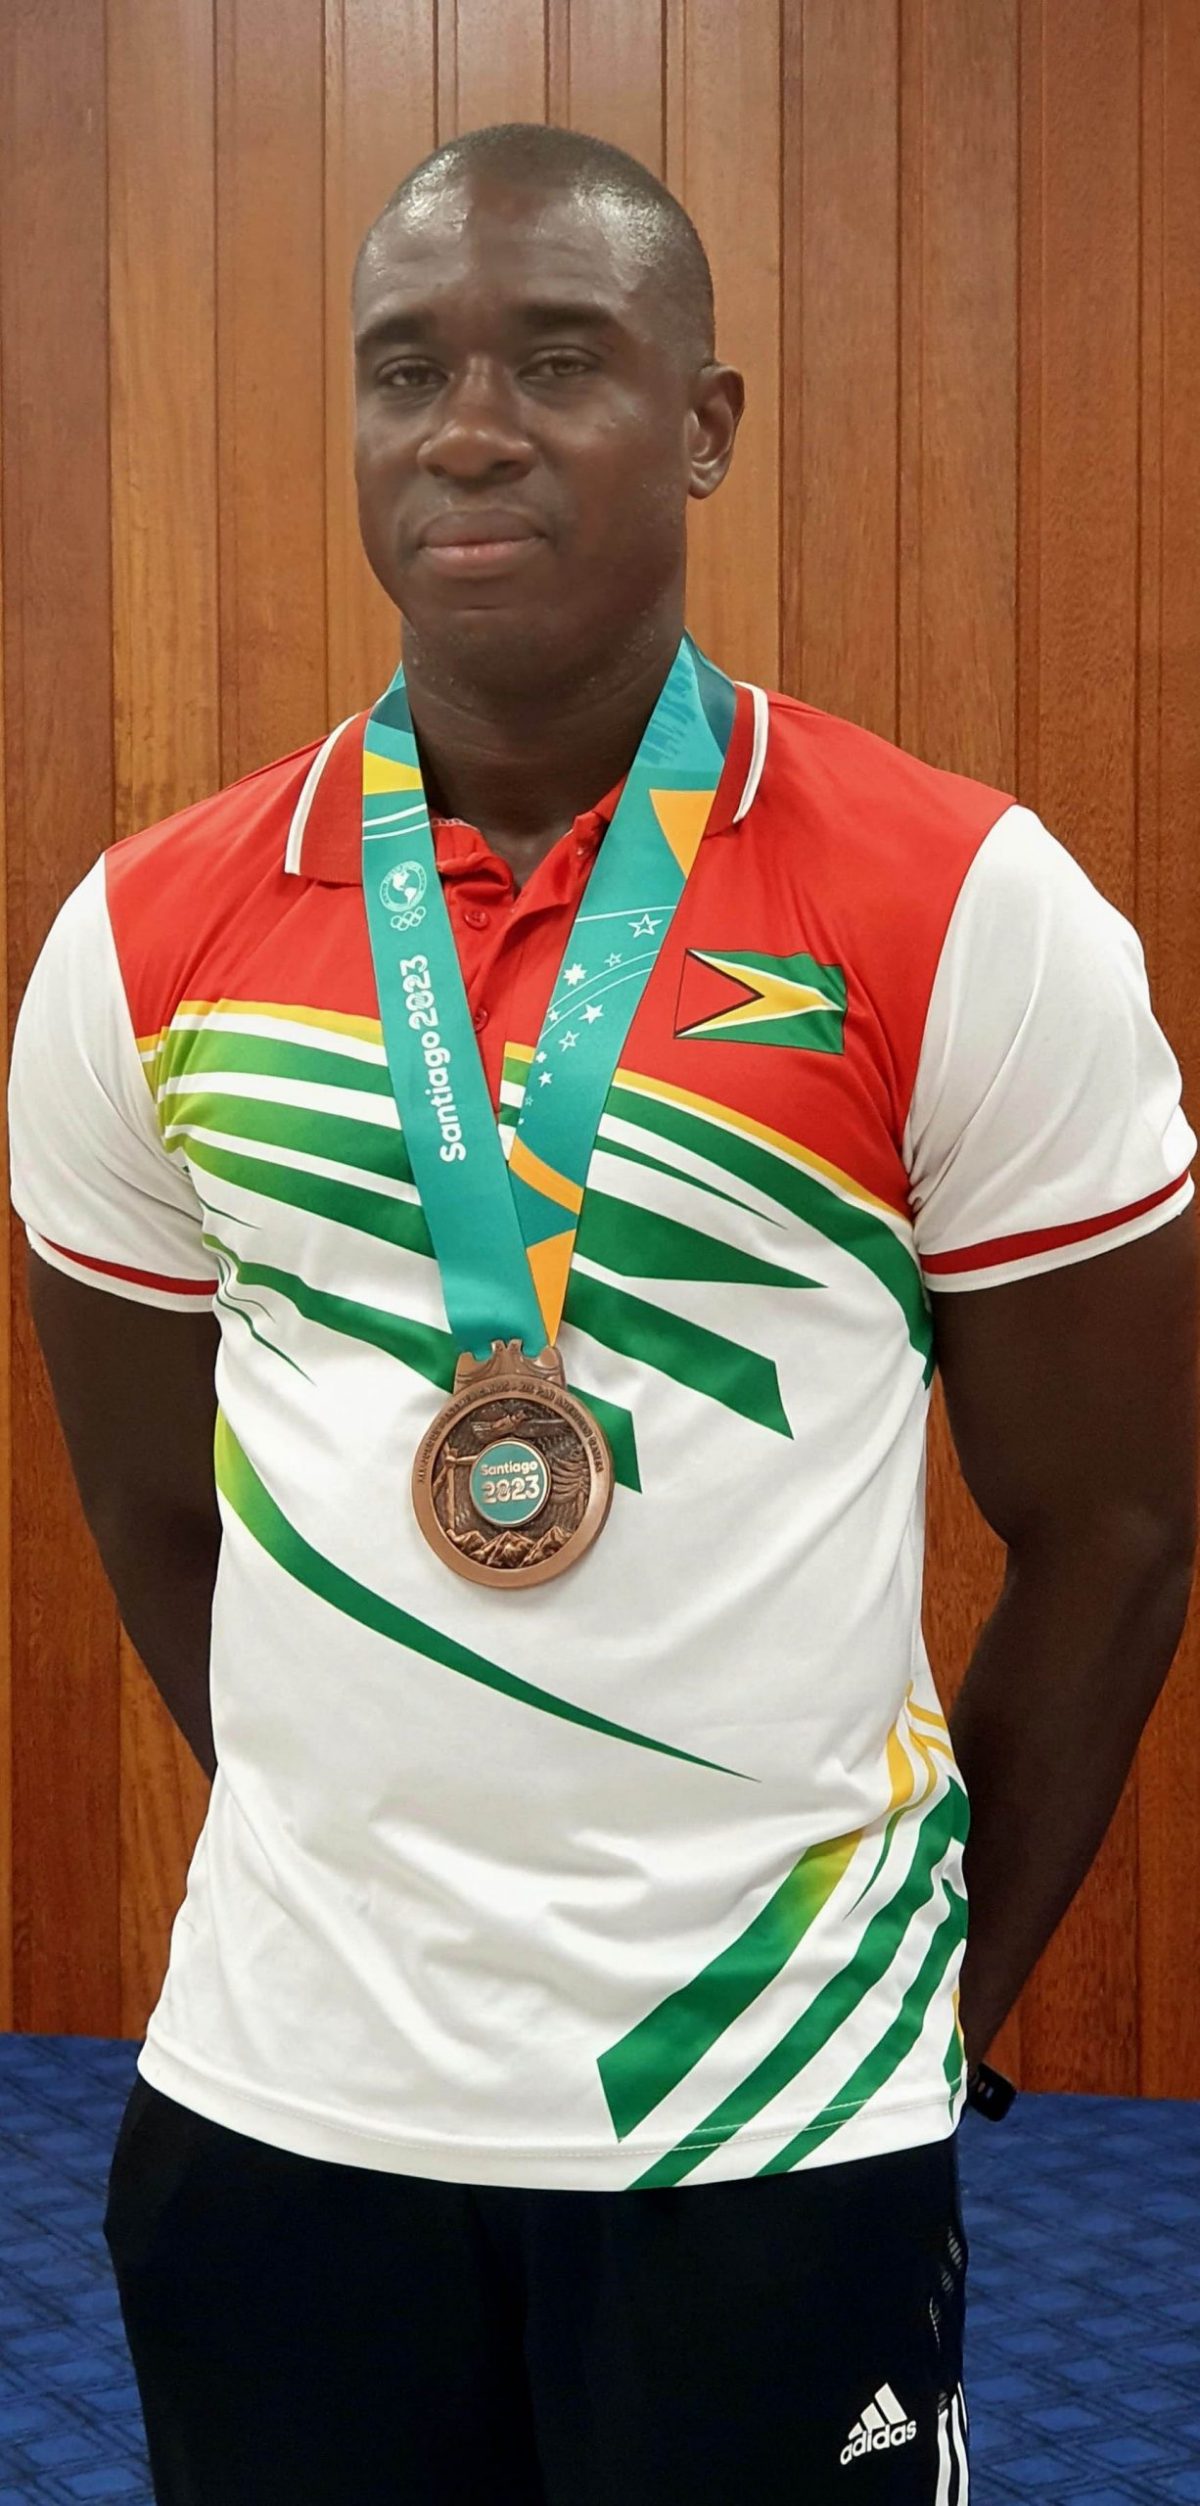 Javelin thrower Leslain Baird was rewarded with GYD $400,000 for his bronze medal exploits at the Pan Am Games in Santiago, Chile